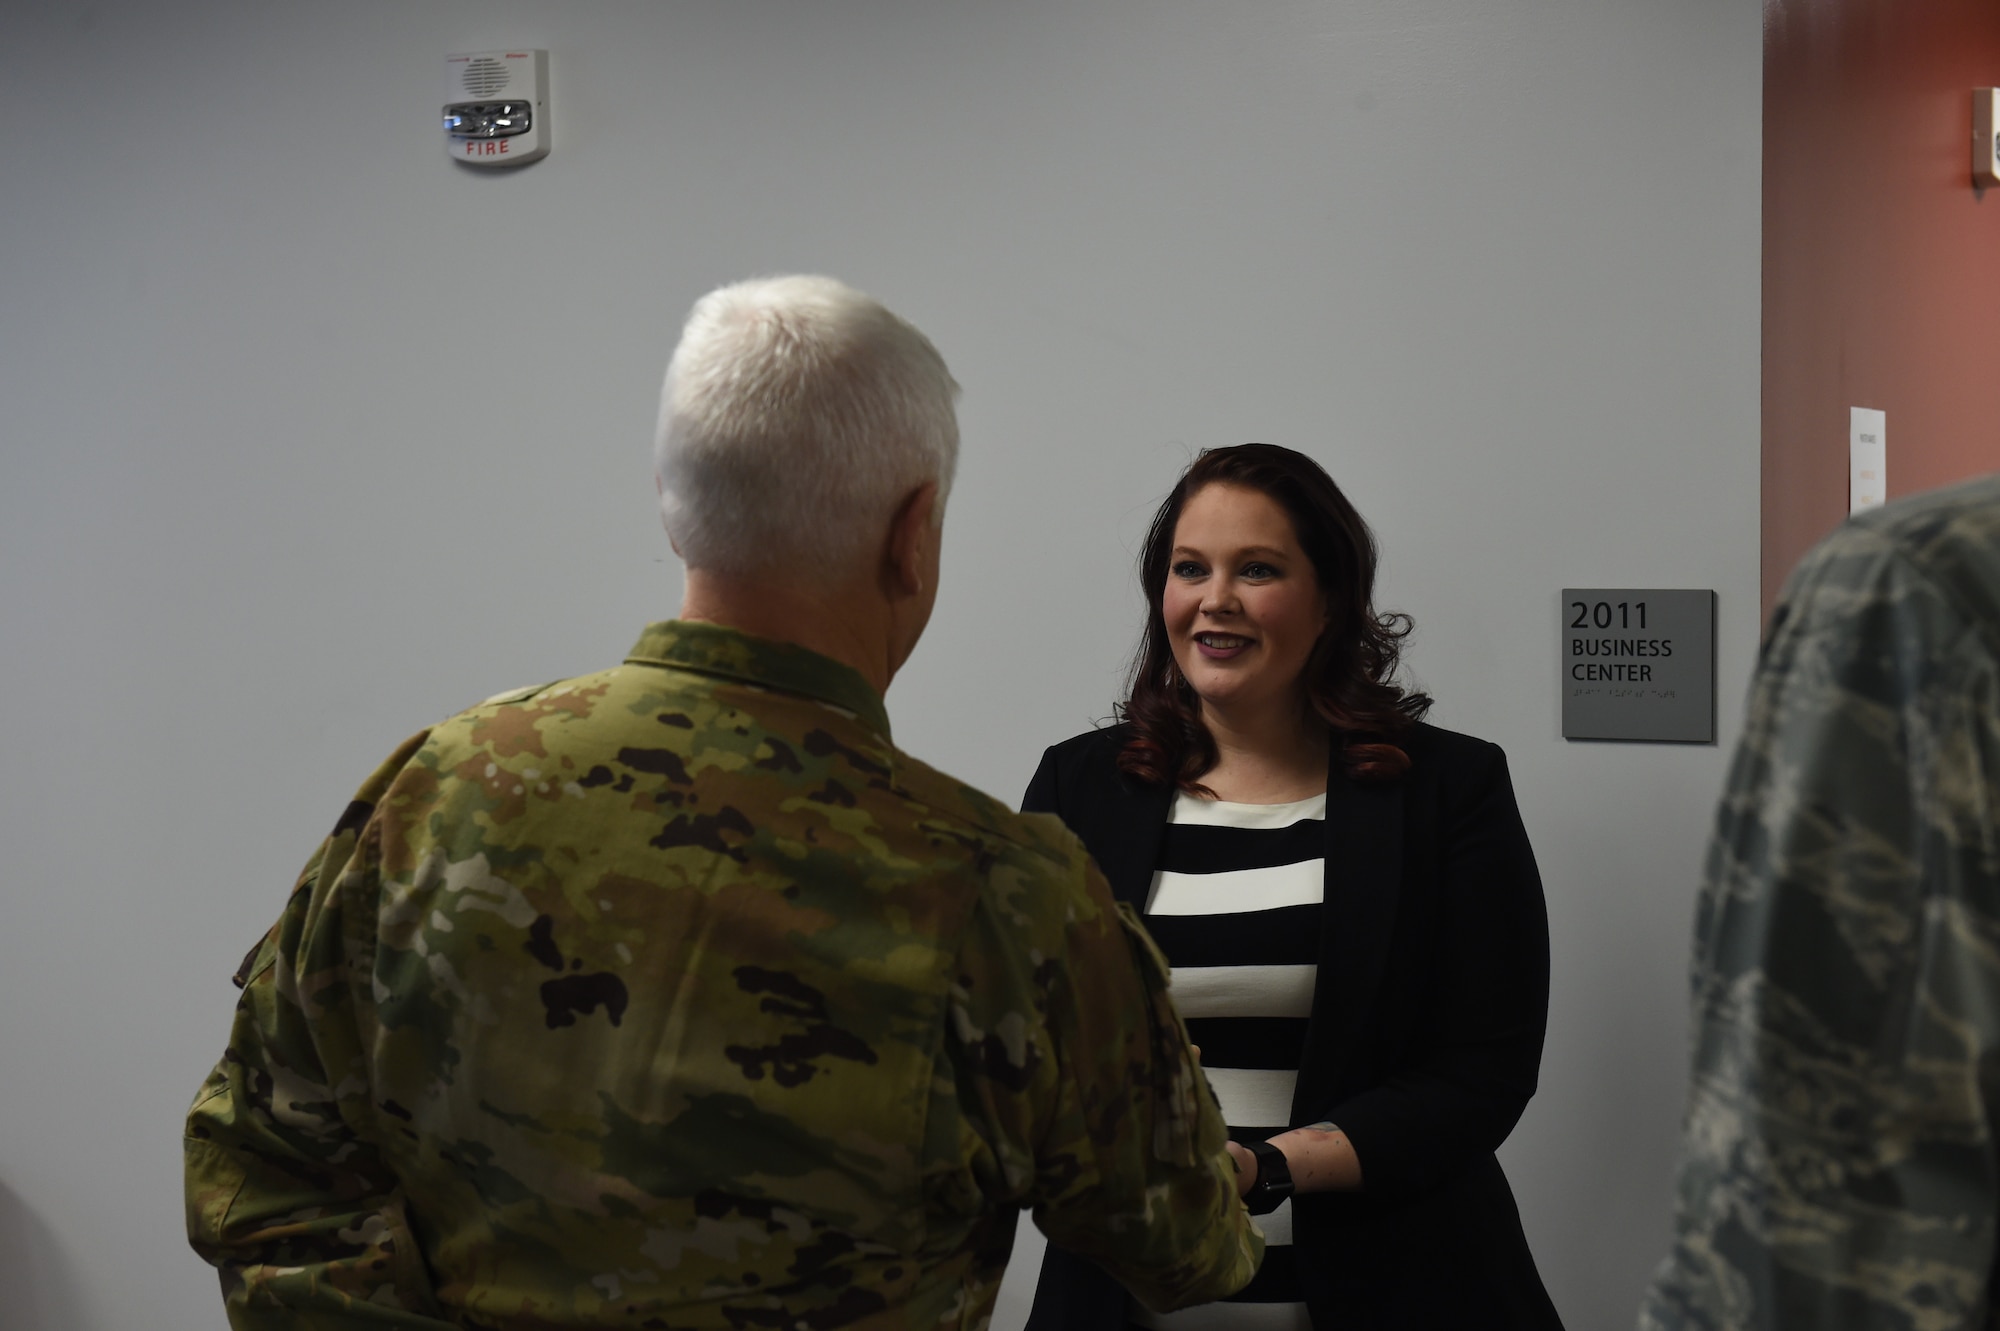 Britny Marin is coined by Lt. Gen. Scott Rice, Director of the Air National Guard, February 13, 2019. Britny won 2018 Joan Orr Air Force Spouse of the Year Award at the Air National Guard level. (U.S. Air National Guard photo by Staff Sgt. Michael J. Kelly)